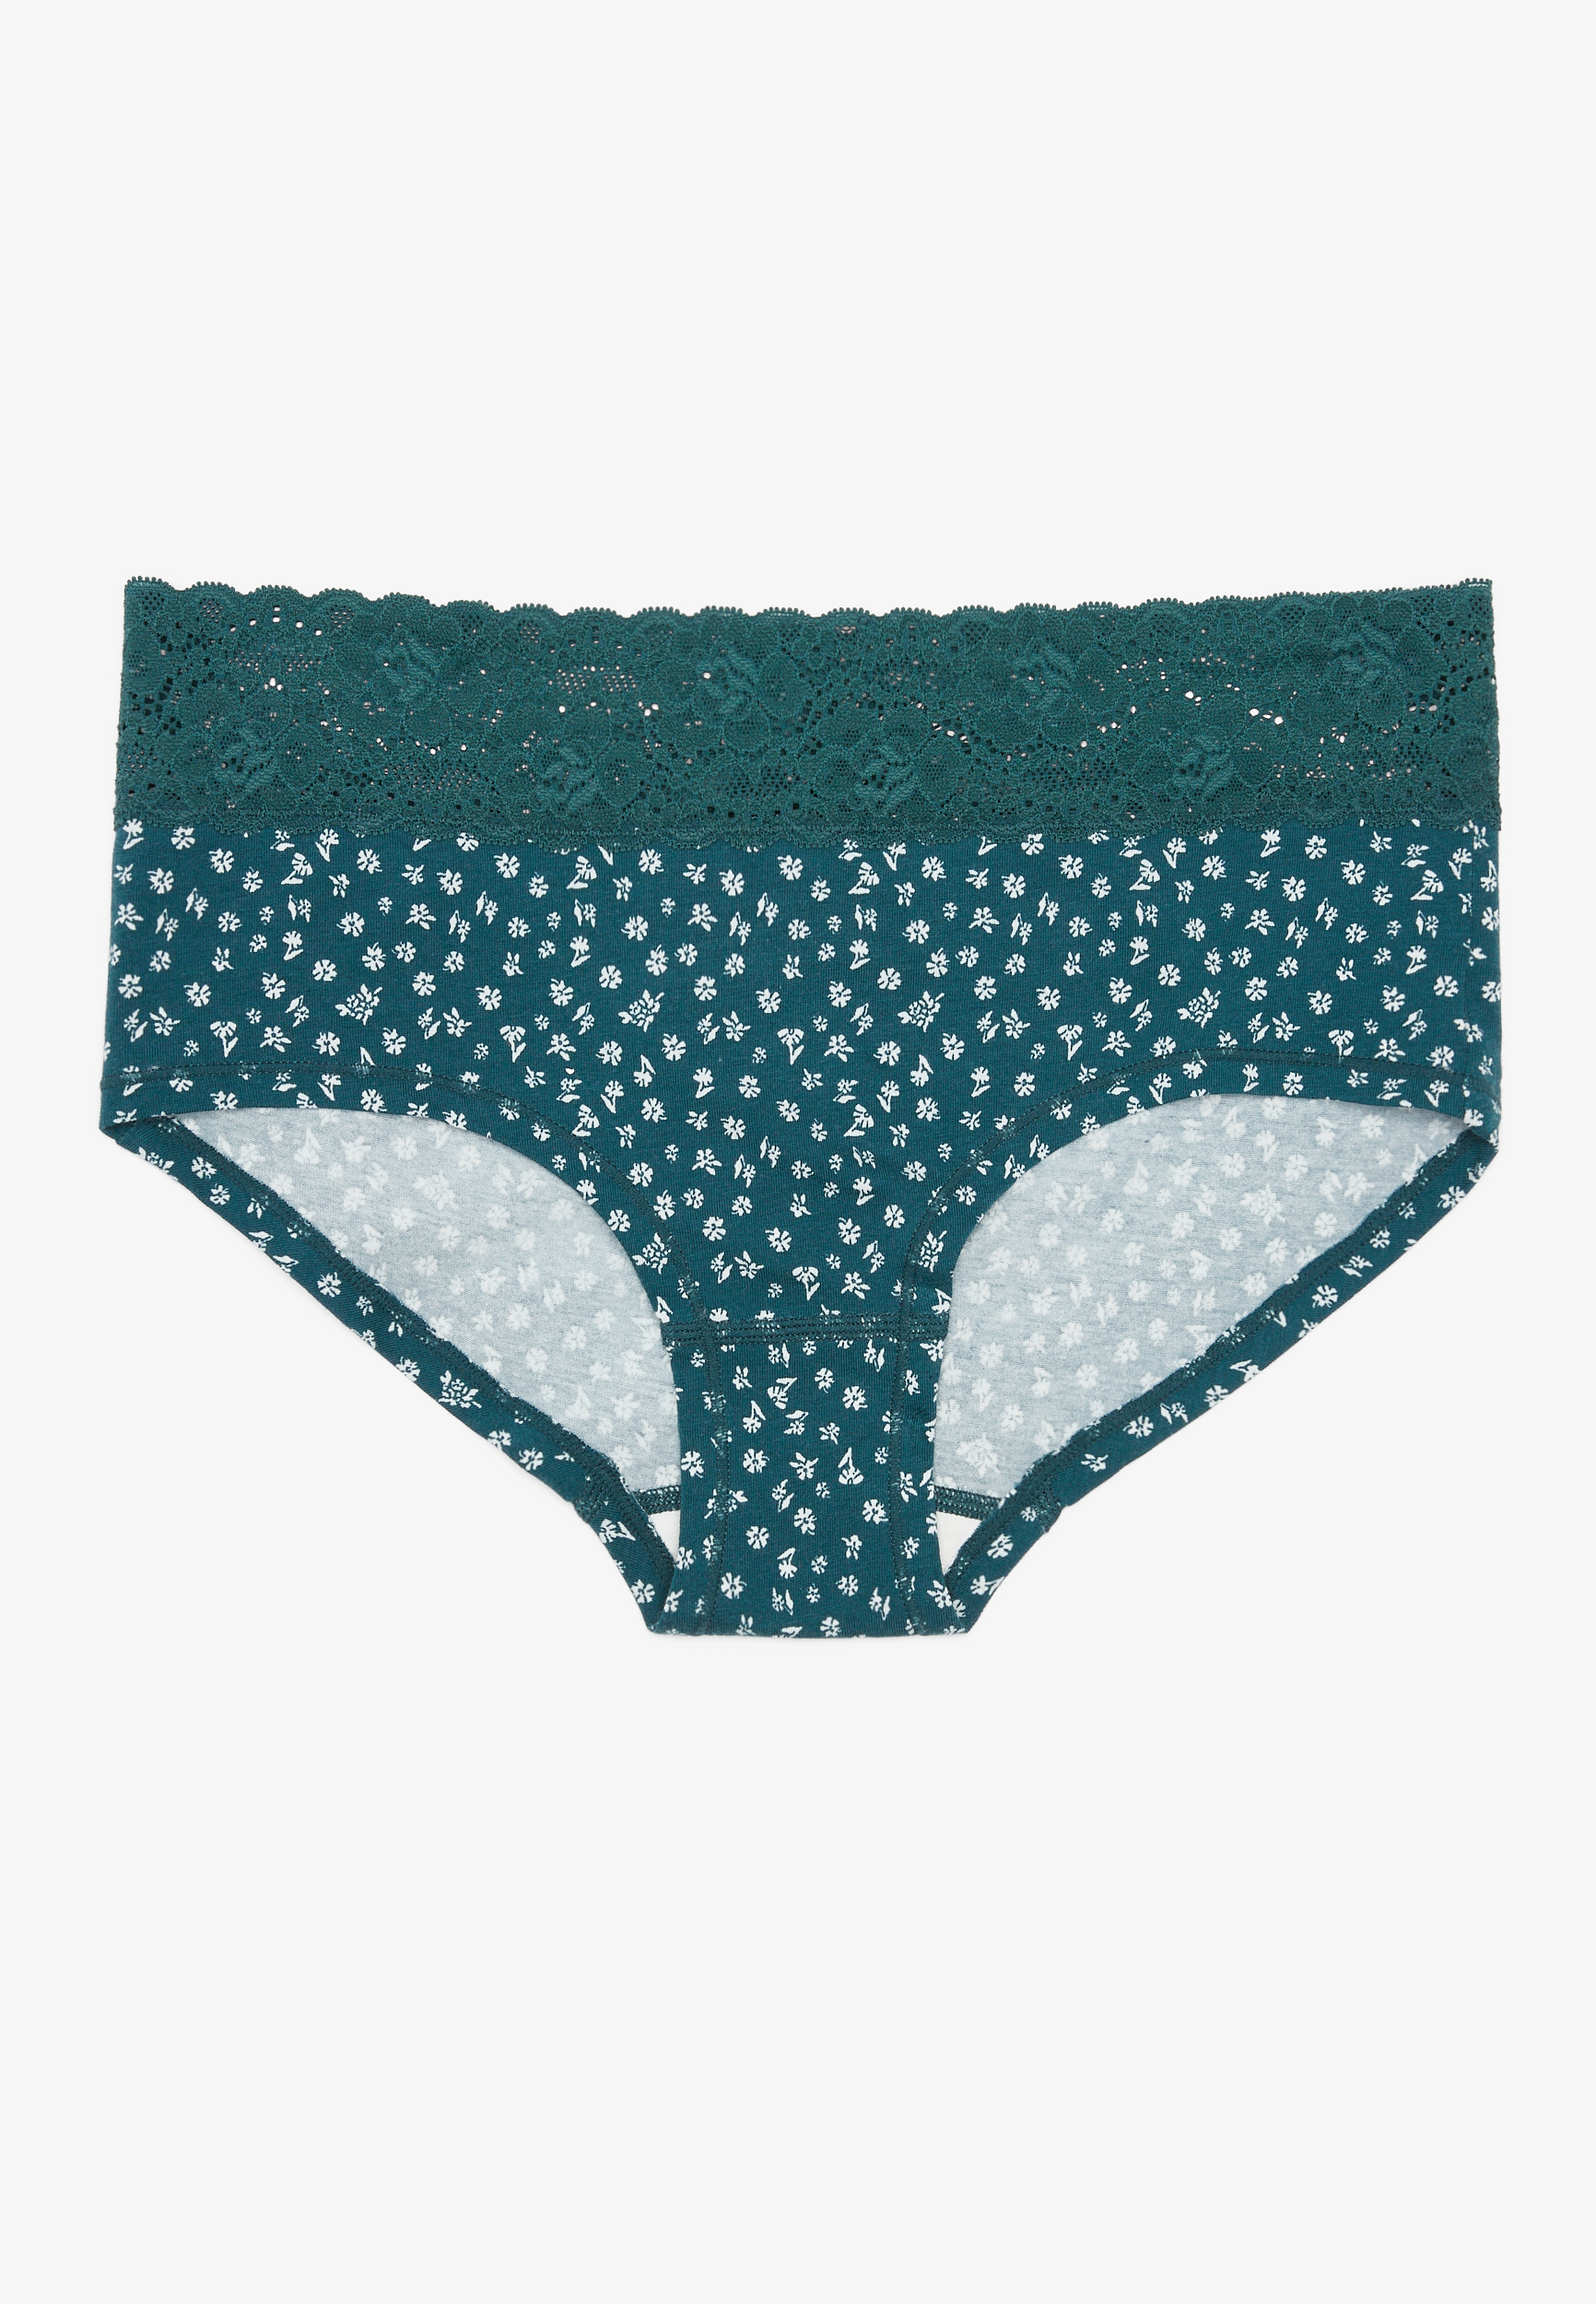 Simply Comfy Trim Floral Boybrief Panty | maurices